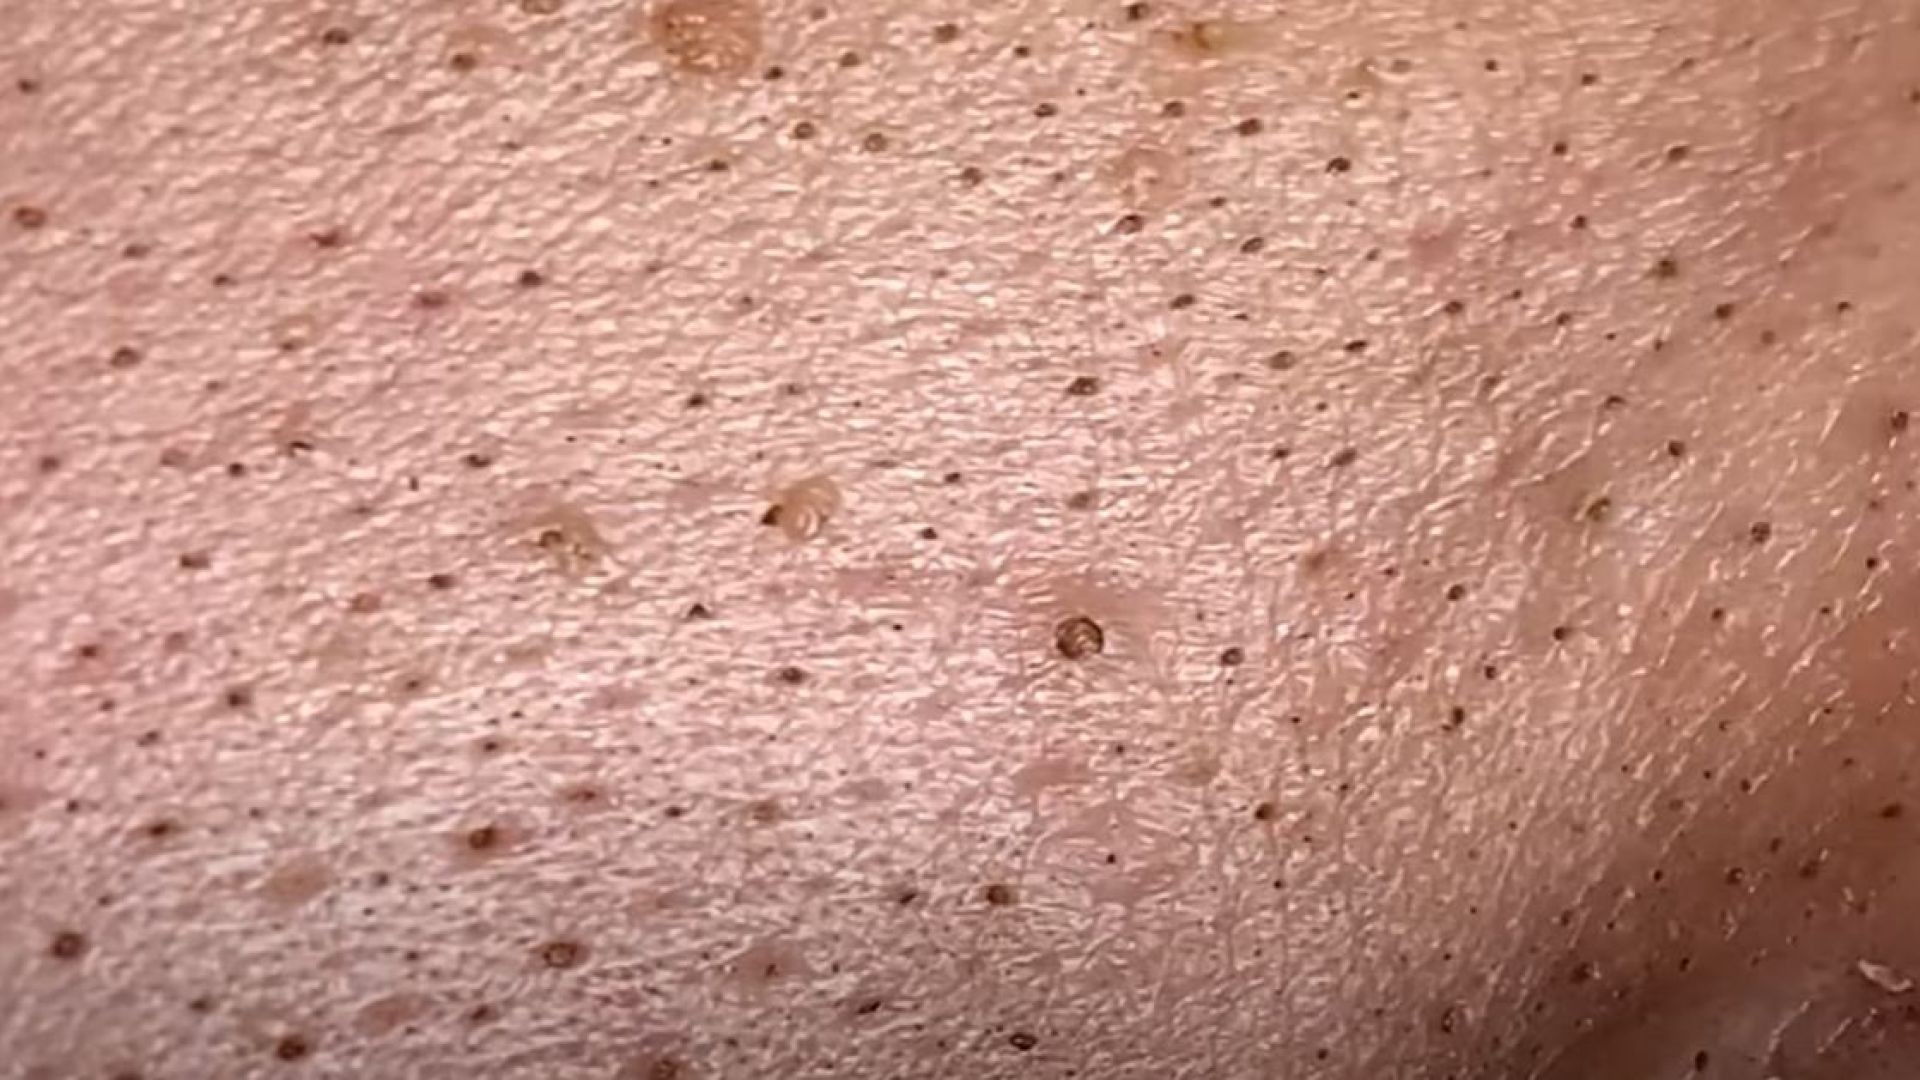 Extreme pimple popping with the ugliest blackheads in history